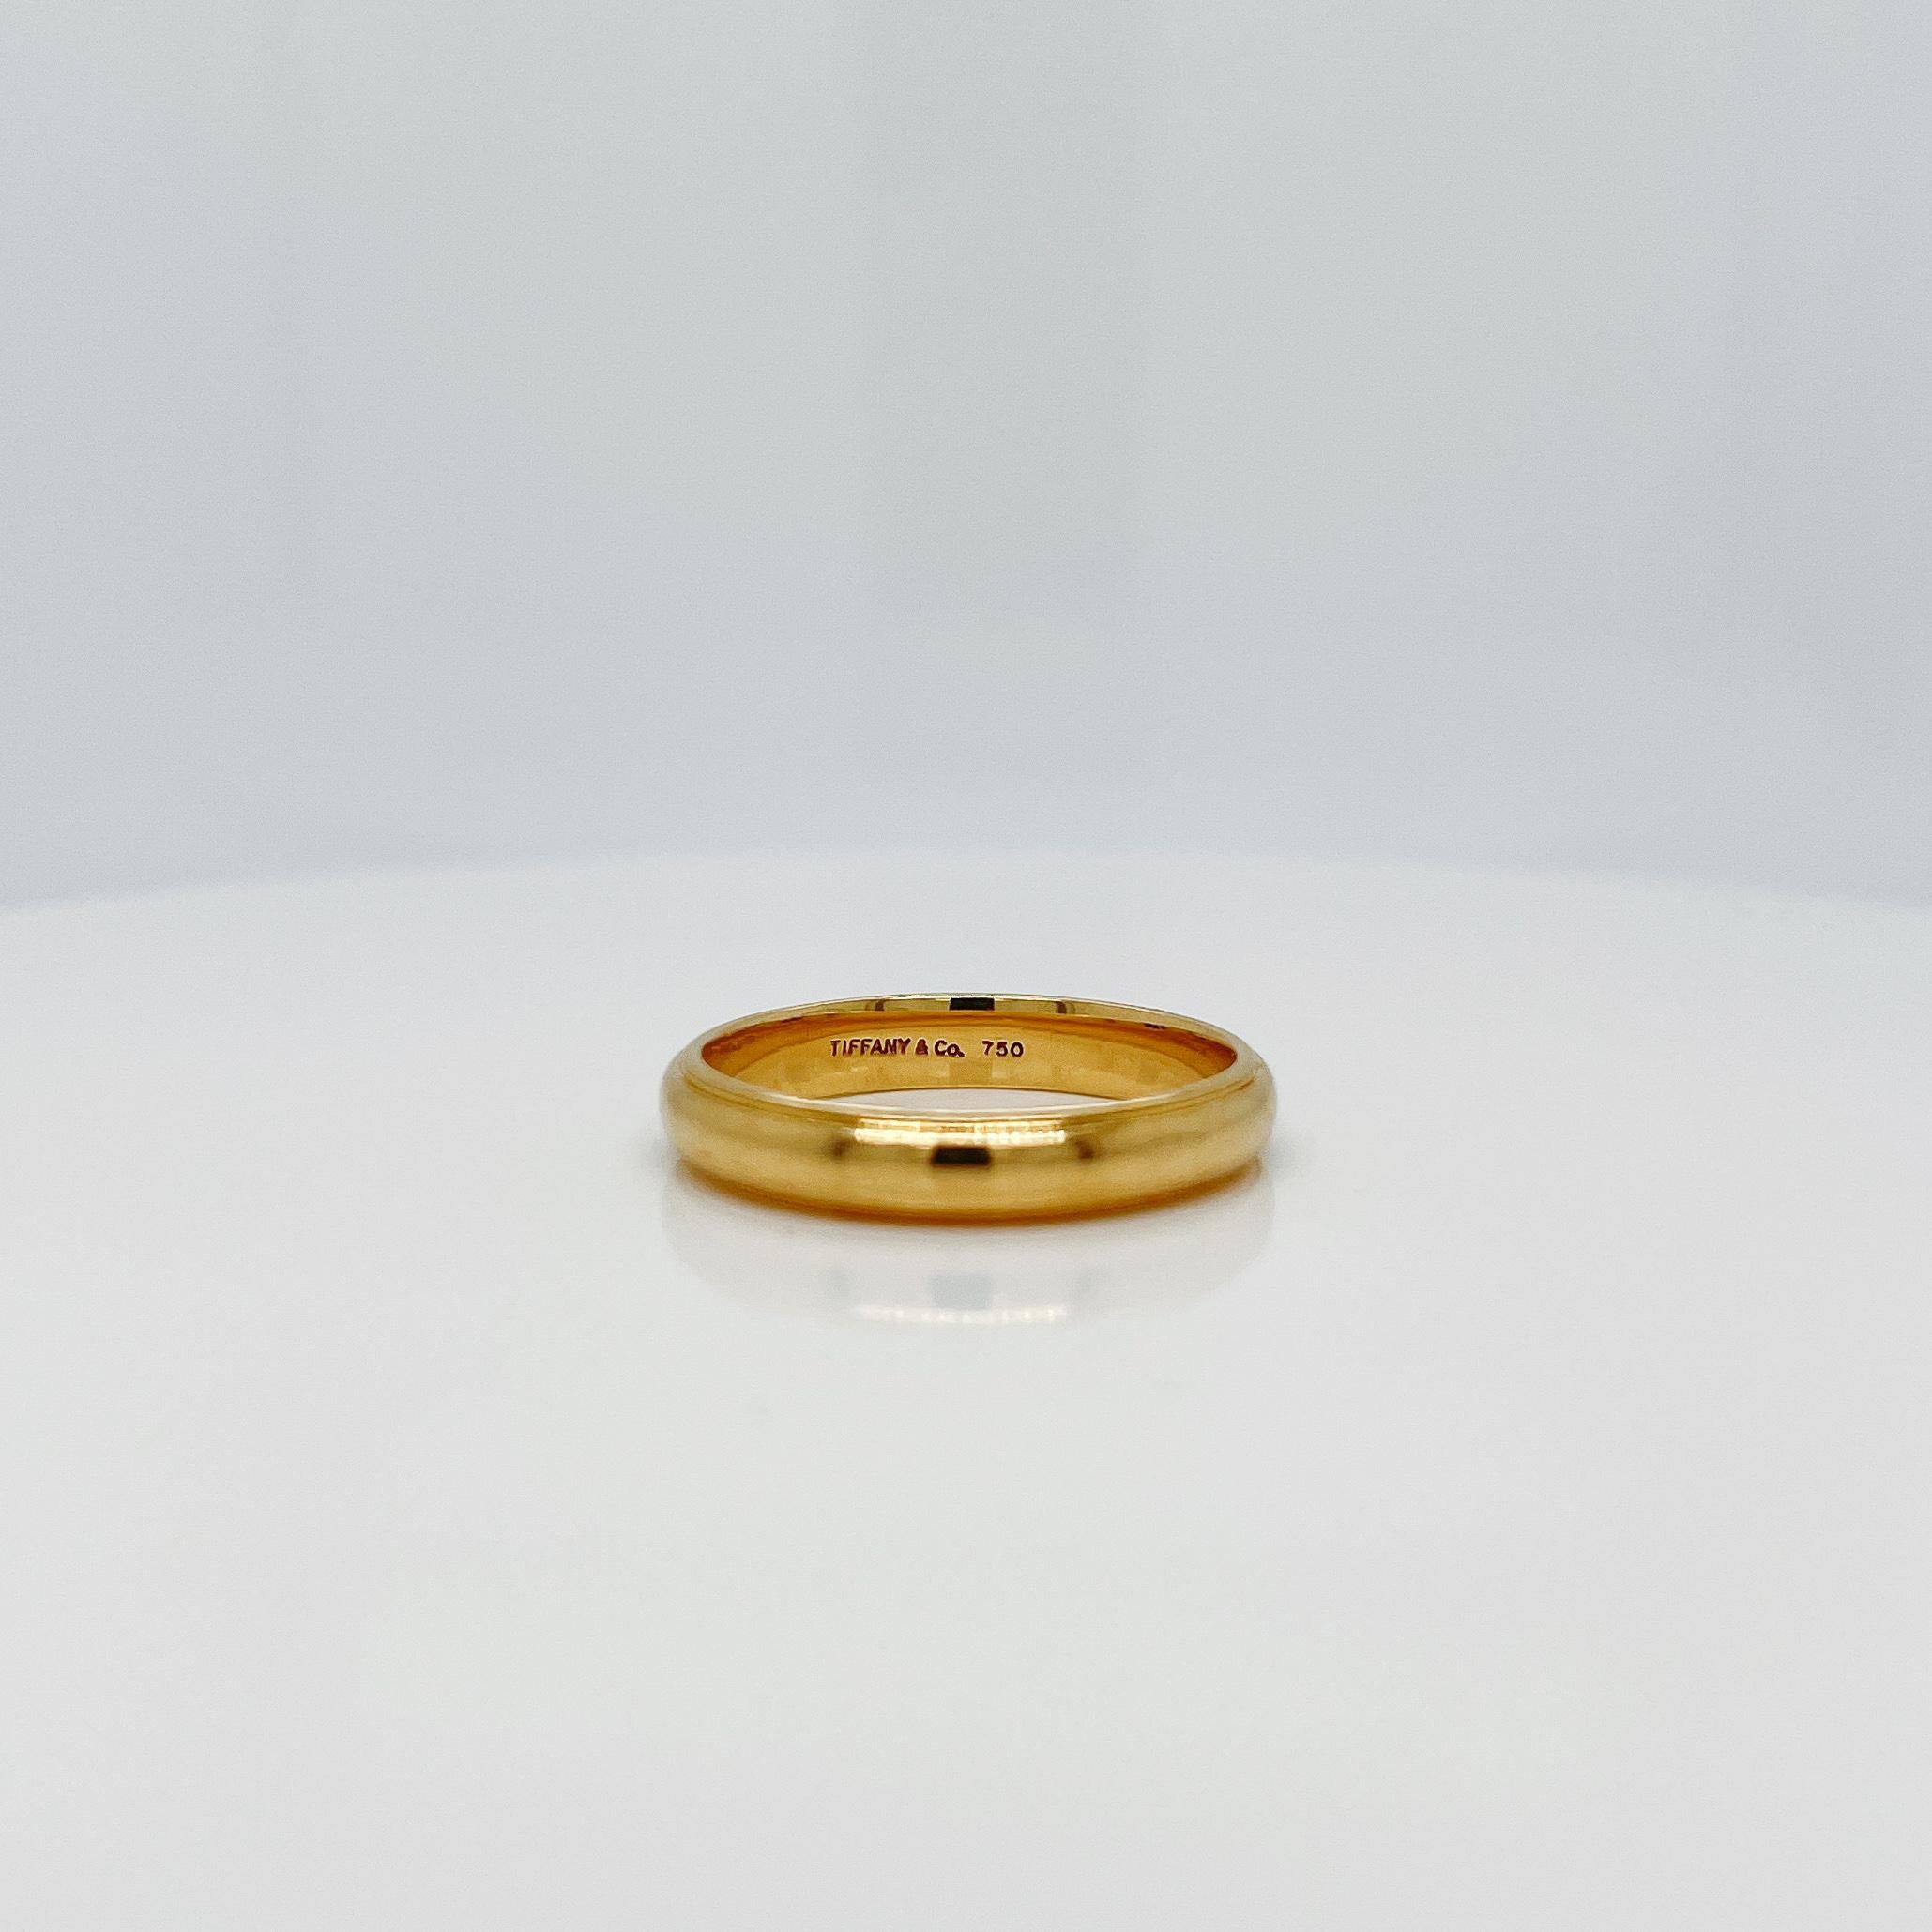 A fine men's wedding band or ring.

By Tiffany & Co. 

In 18k yellow gold.

Simply a handsome ring!

Date:
20th Century

Overall Condition:
It is in overall good, as-pictured, used estate condition.

Condition Details:
There is some light edge wear.